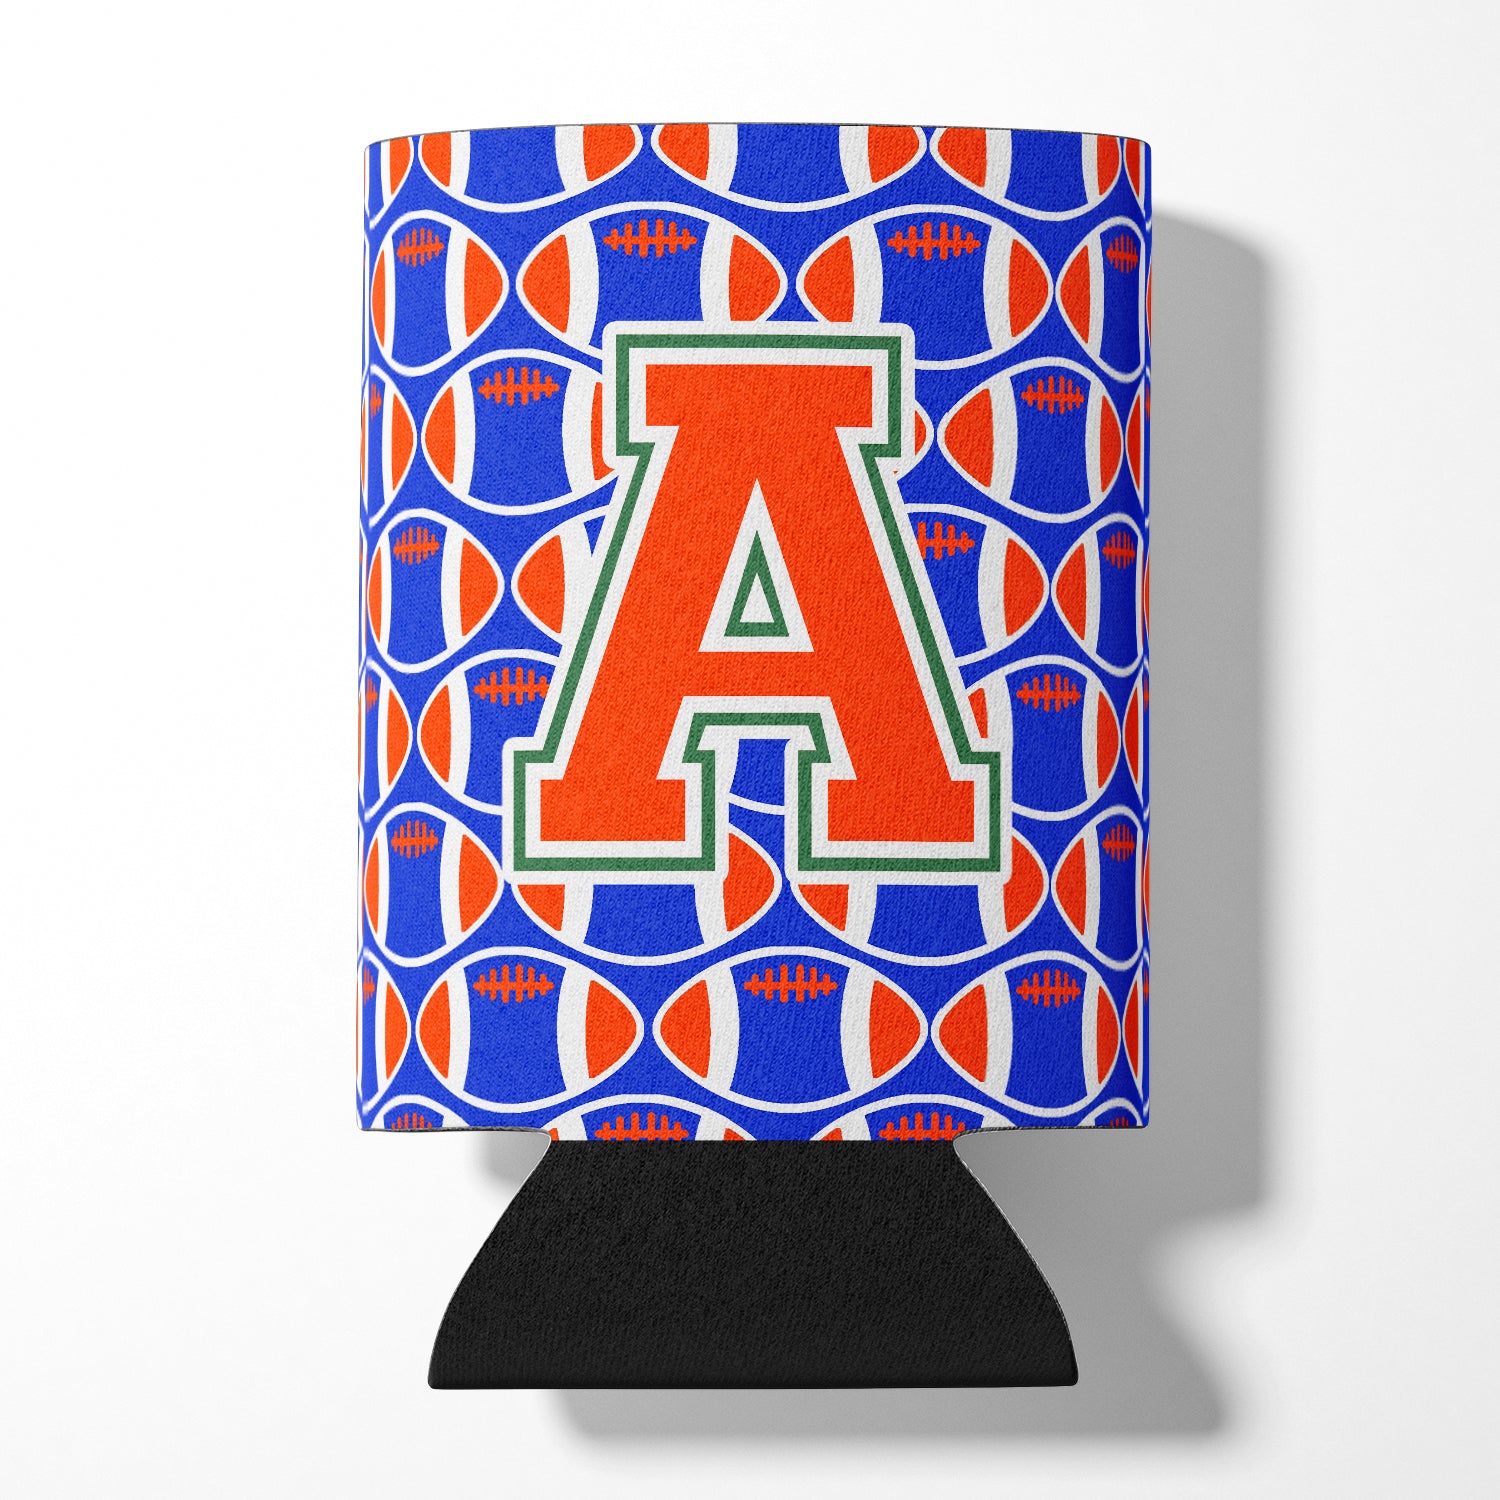 Letter A Football Green, Blue and Orange Can or Bottle Hugger CJ1083-ACC.